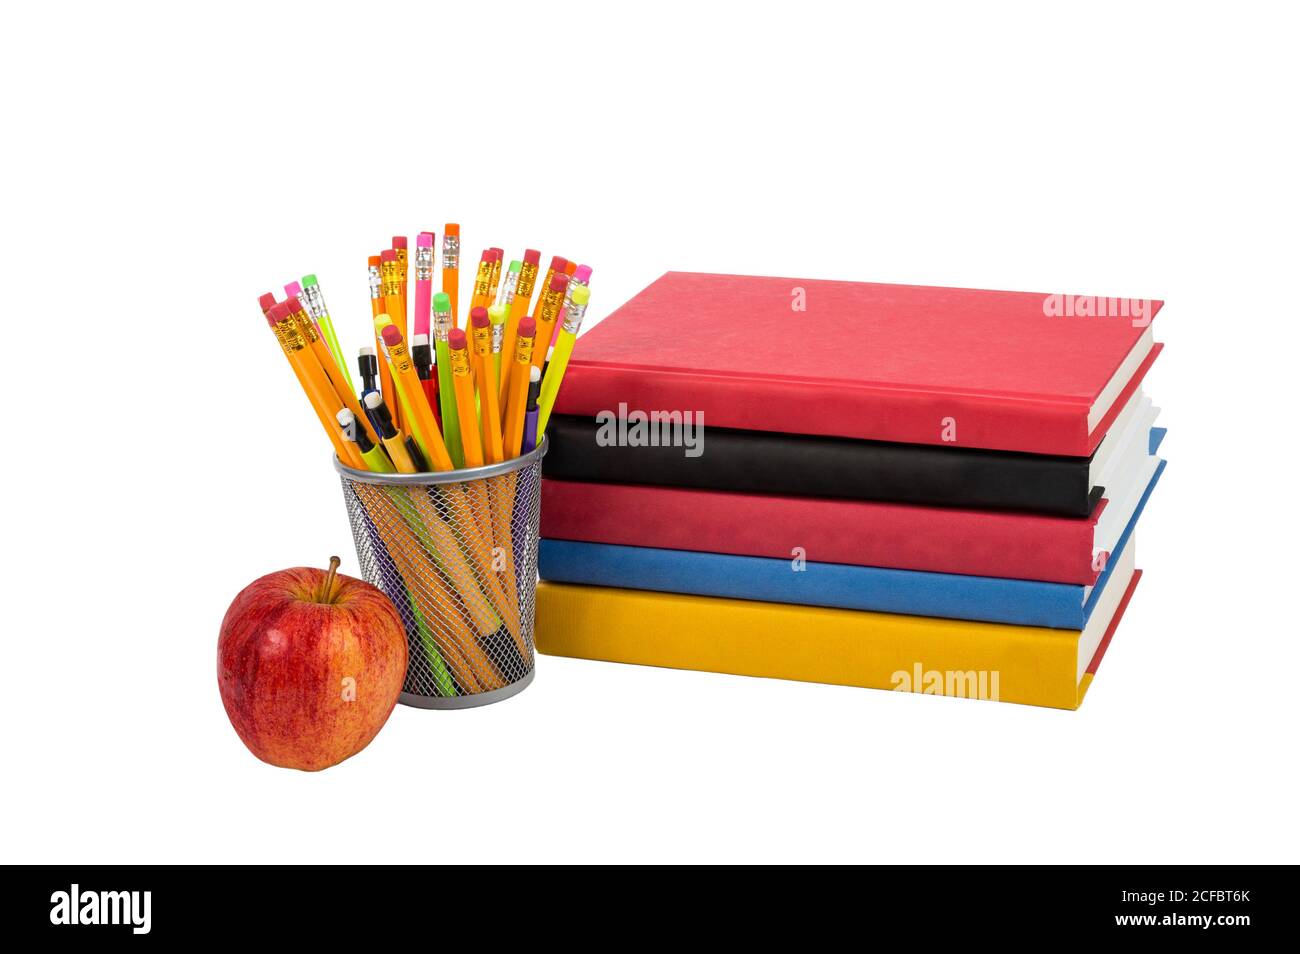 Colorful horizontal photo of a stack of books with an apple and colorful pencils. Isolated on a white background. Stock Photo